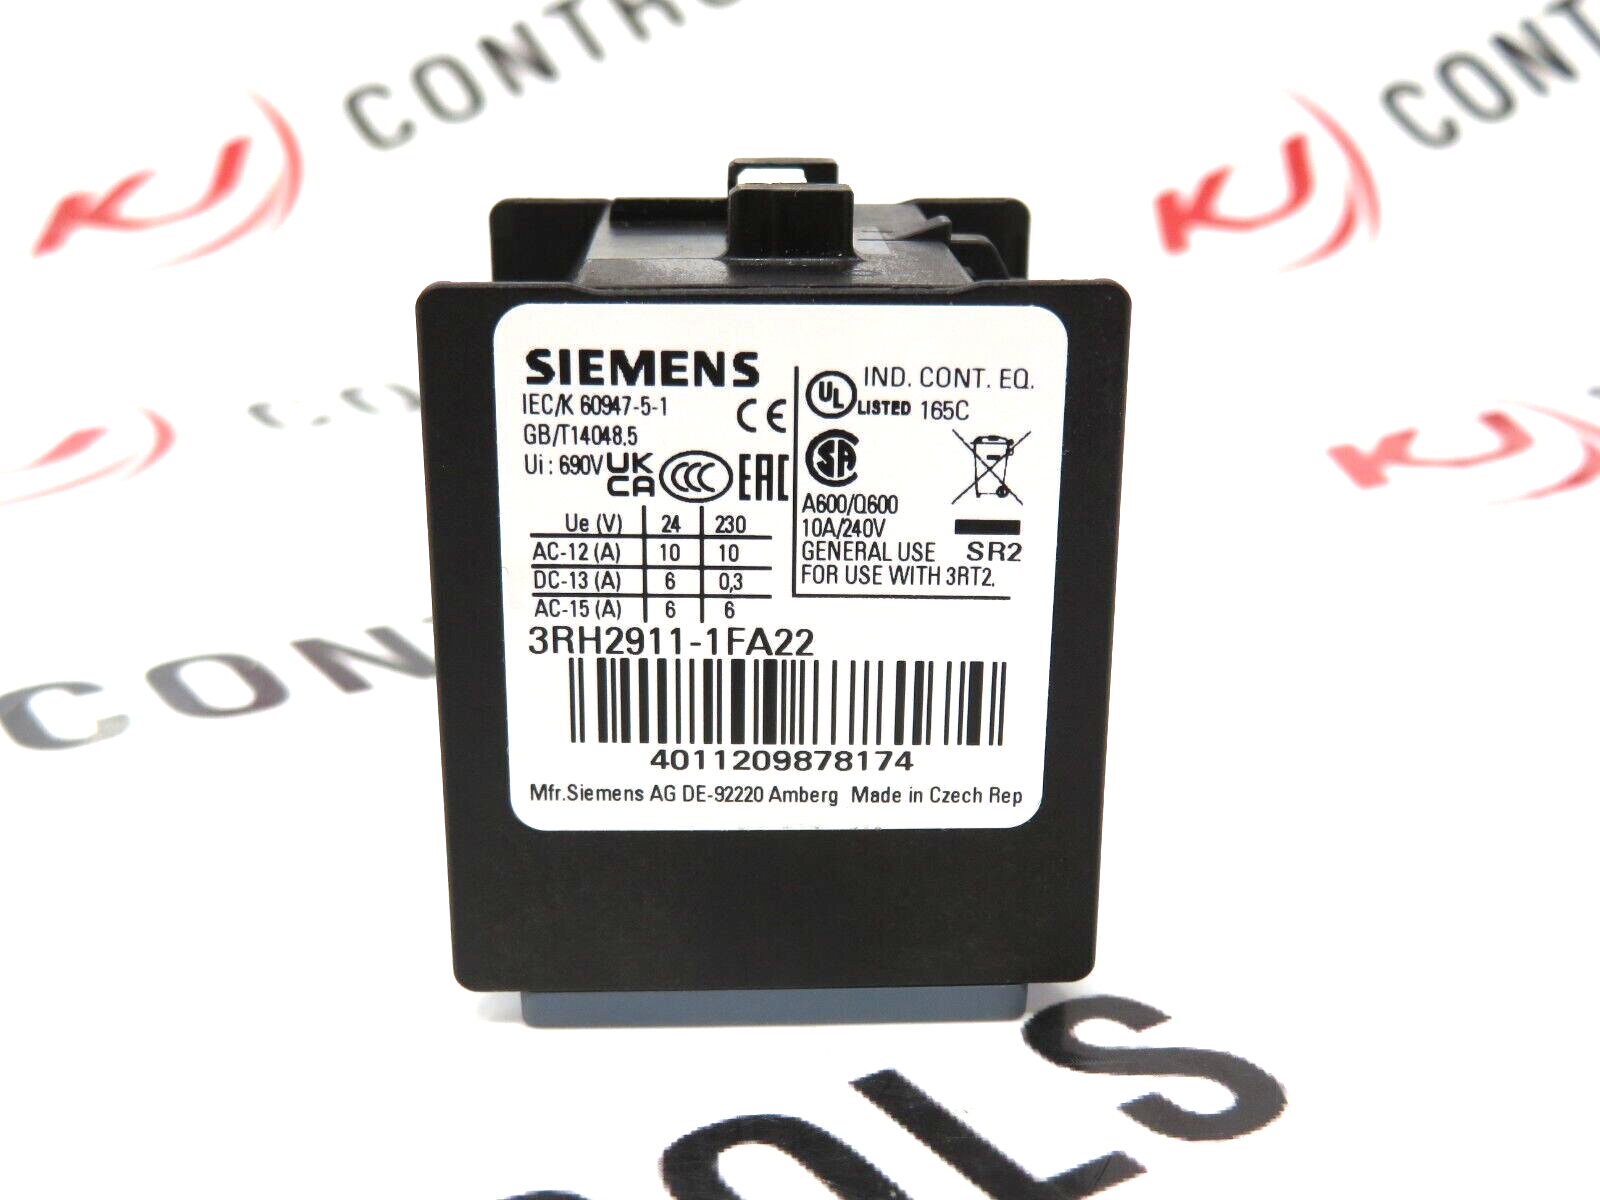 Siemens 3RH2911-1FA22 Auxiliary Switch IP20 2NO/2NC Size S00 And S0 Front Mount